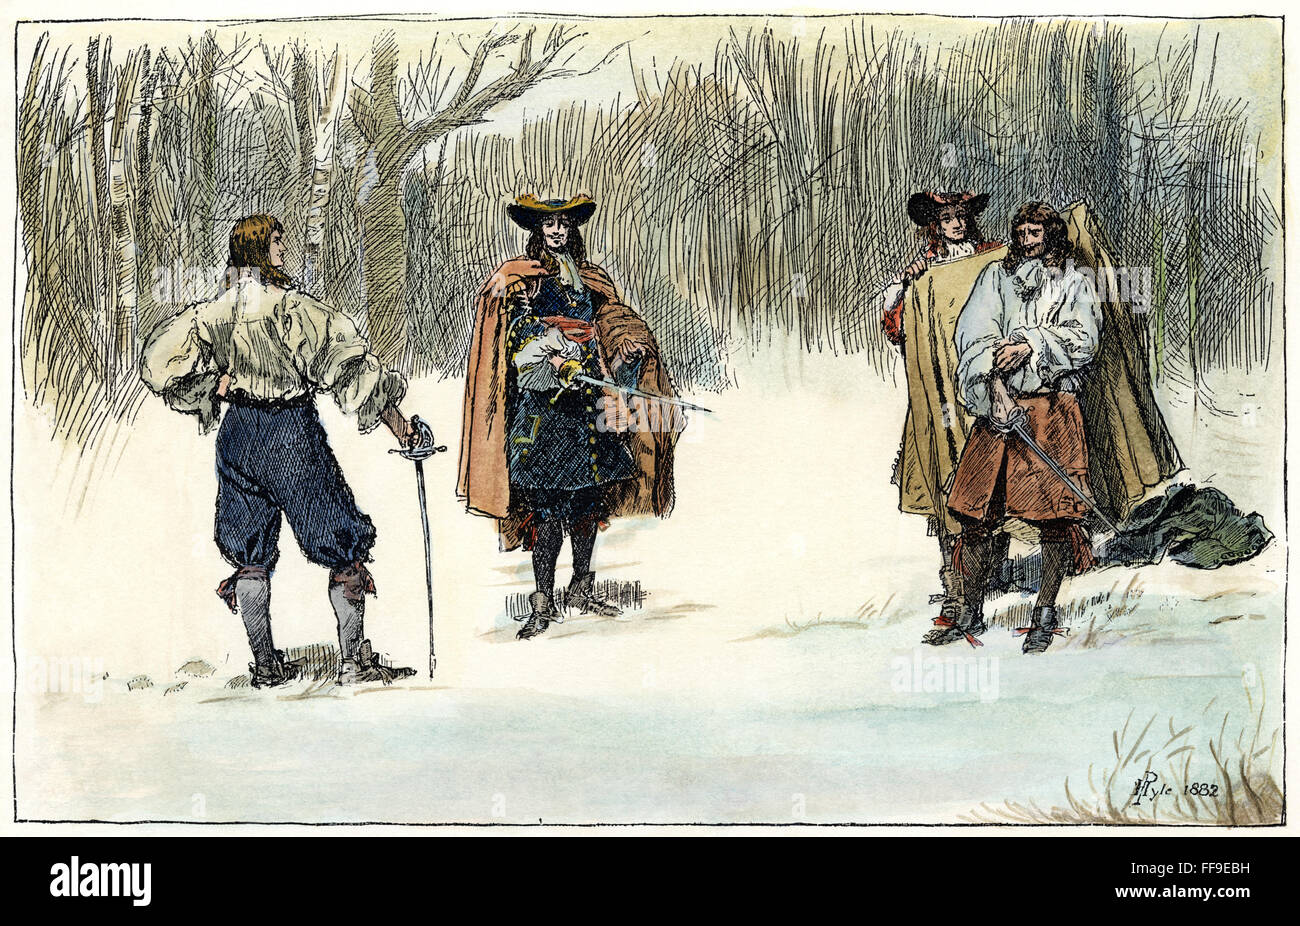 DUEL, 17th CENTURY. /n'The Duel.' Illustration, 1882, by Howard Pyle. Stock Photo